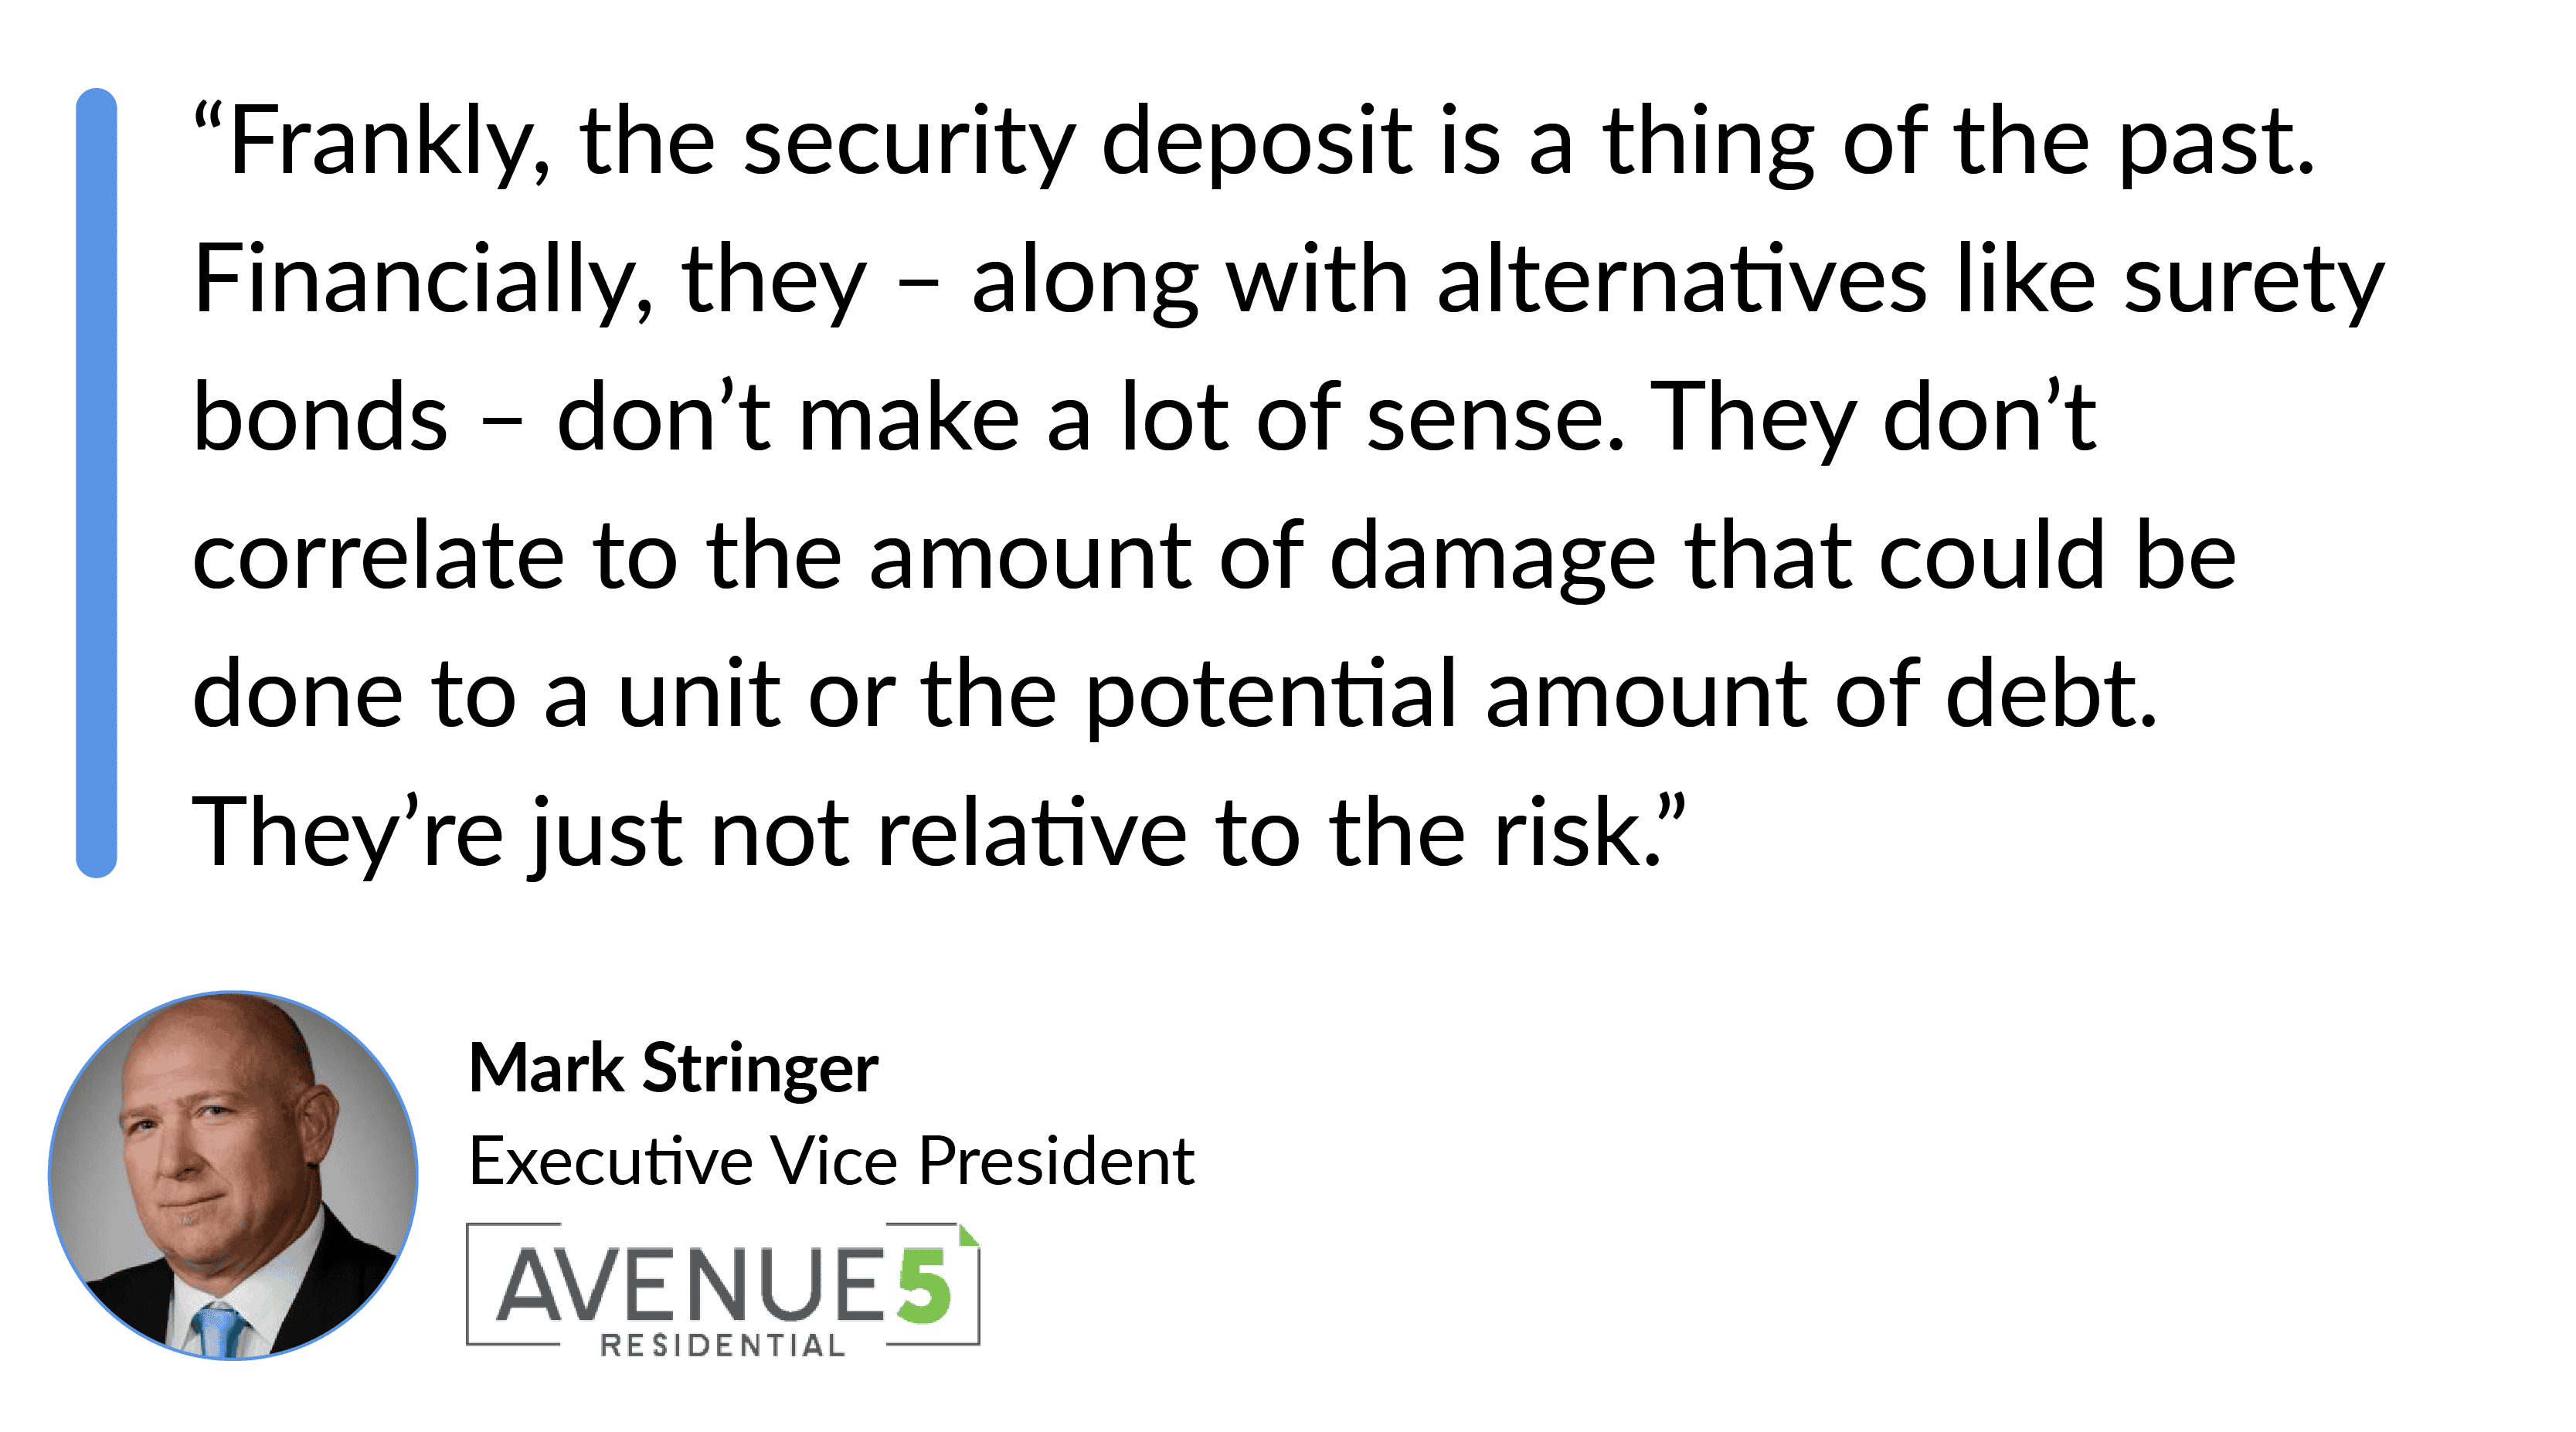 Multifamily Shift to Smarter Loss Protection-Mark Stringer, Executive Vice President for Avenue5 Residential